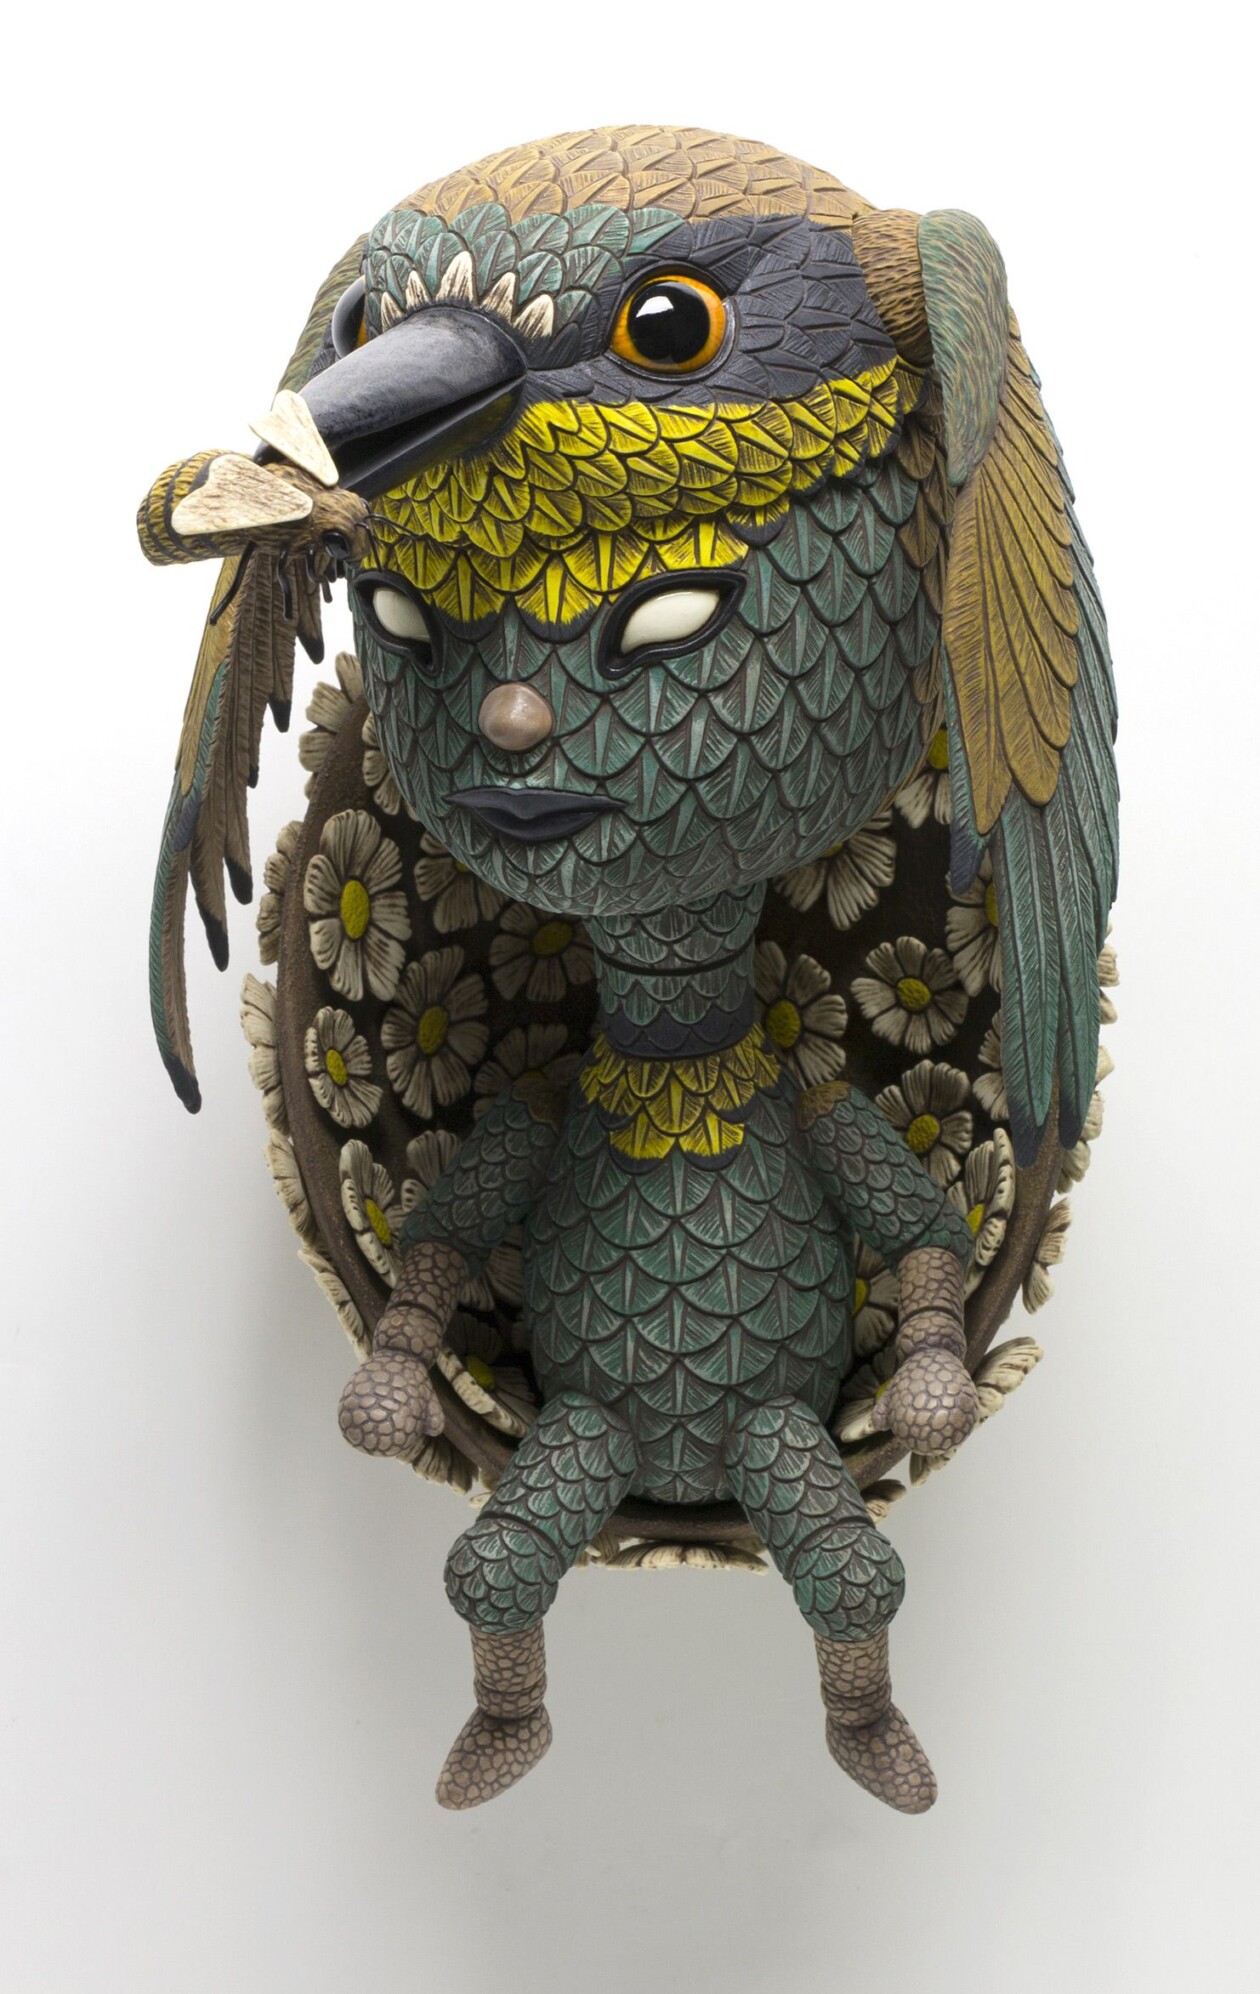 Marvelous Anthropomorphized Bird Sculptures By Calvin Ma (4)